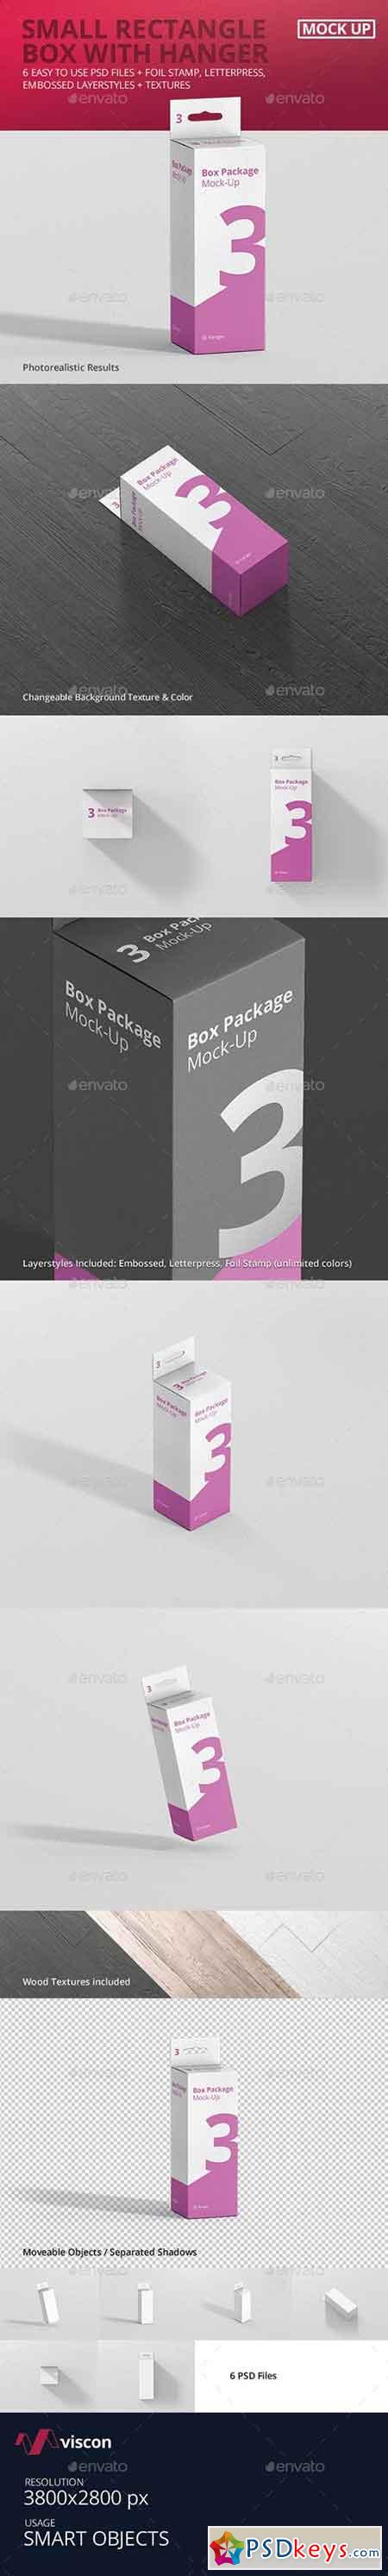 Package Box Mock-Up - Small Rectangle with Hanger 18000852